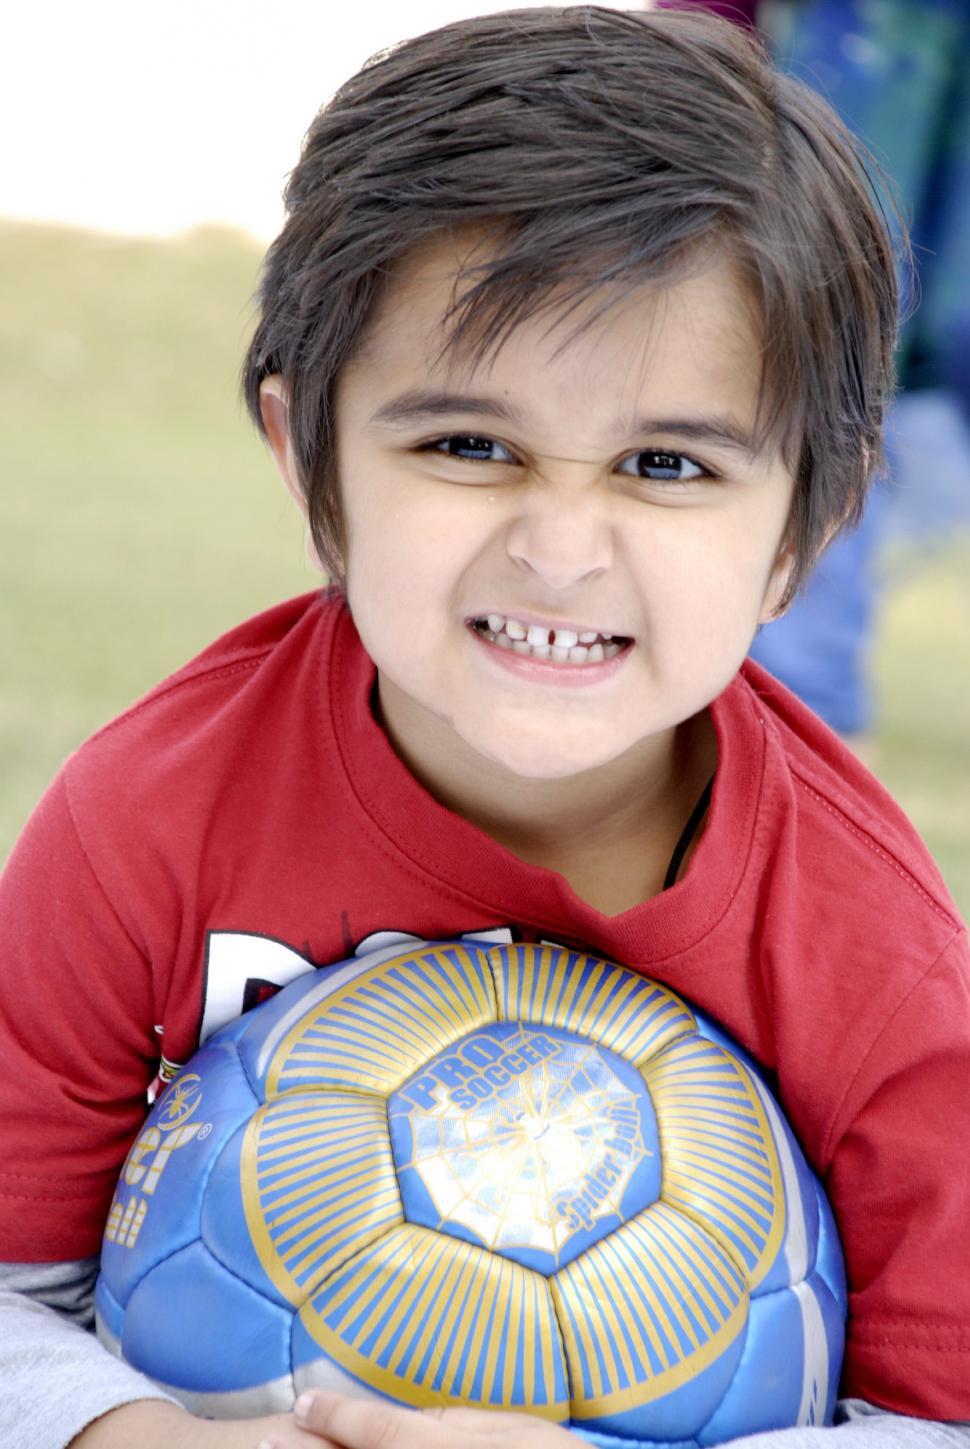 Free Image of Cute Kid with Football 